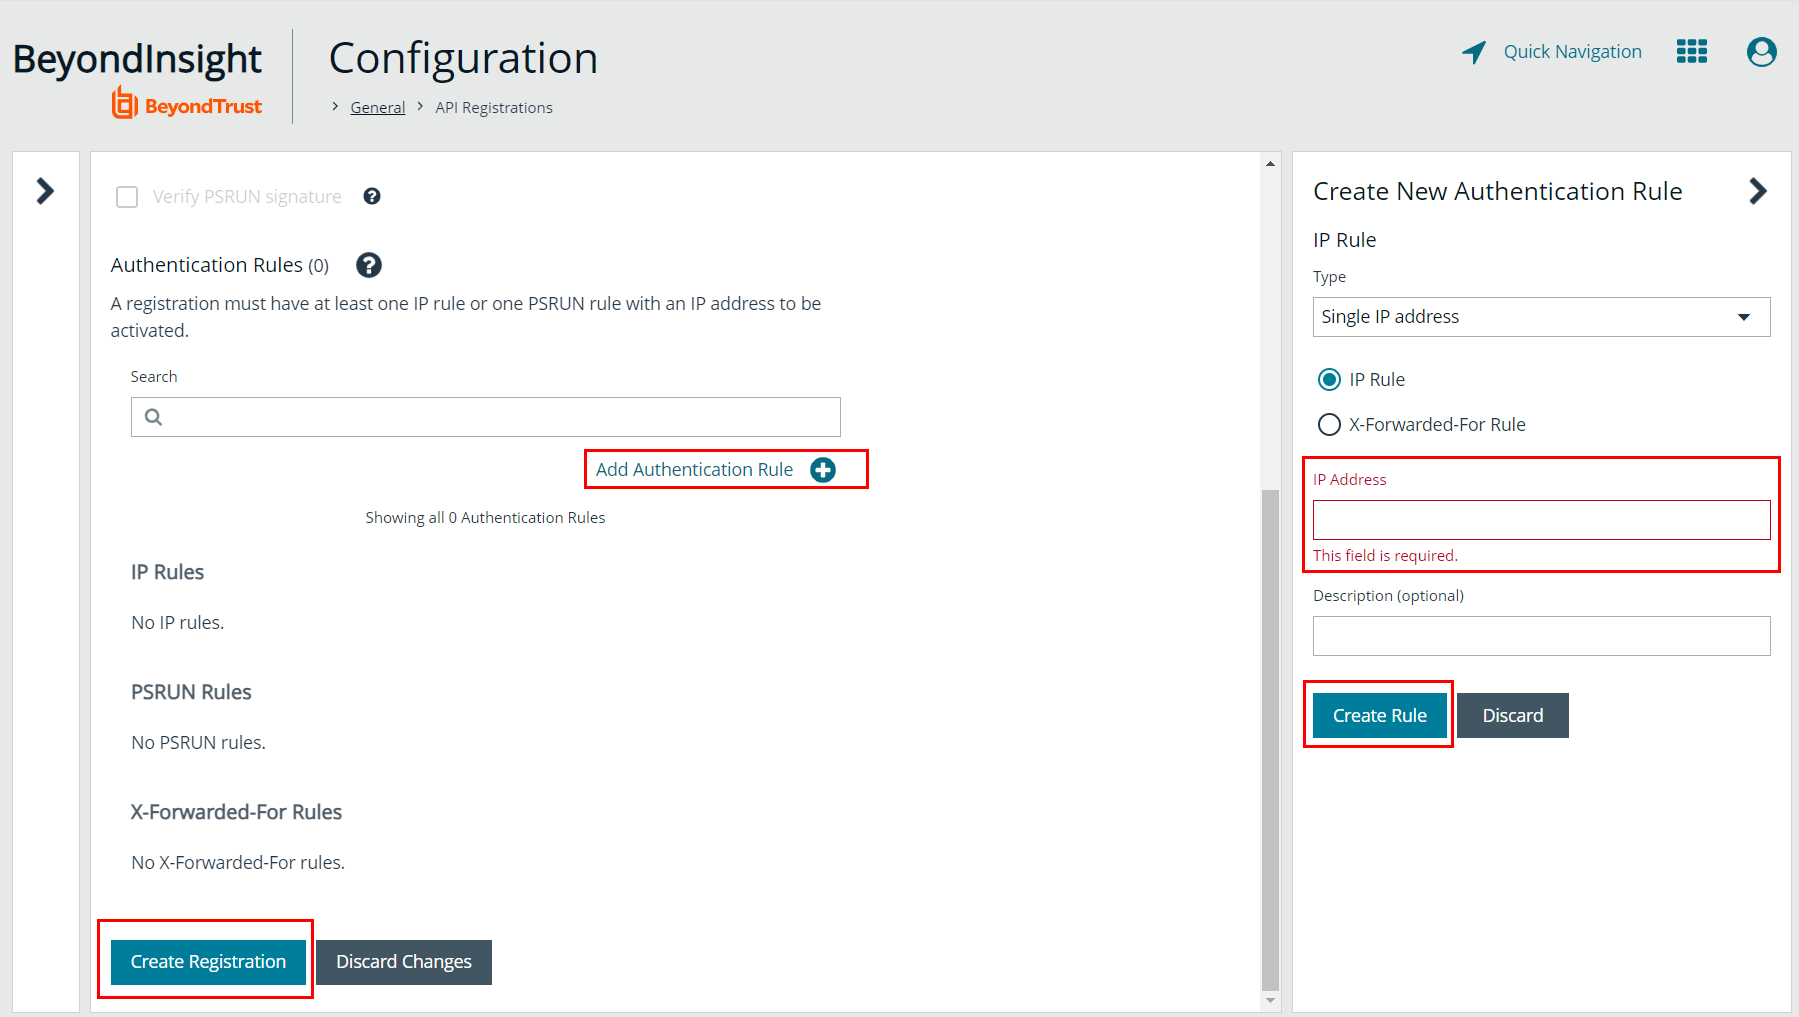 Create authentication rule for new API registration in BeyondInsight